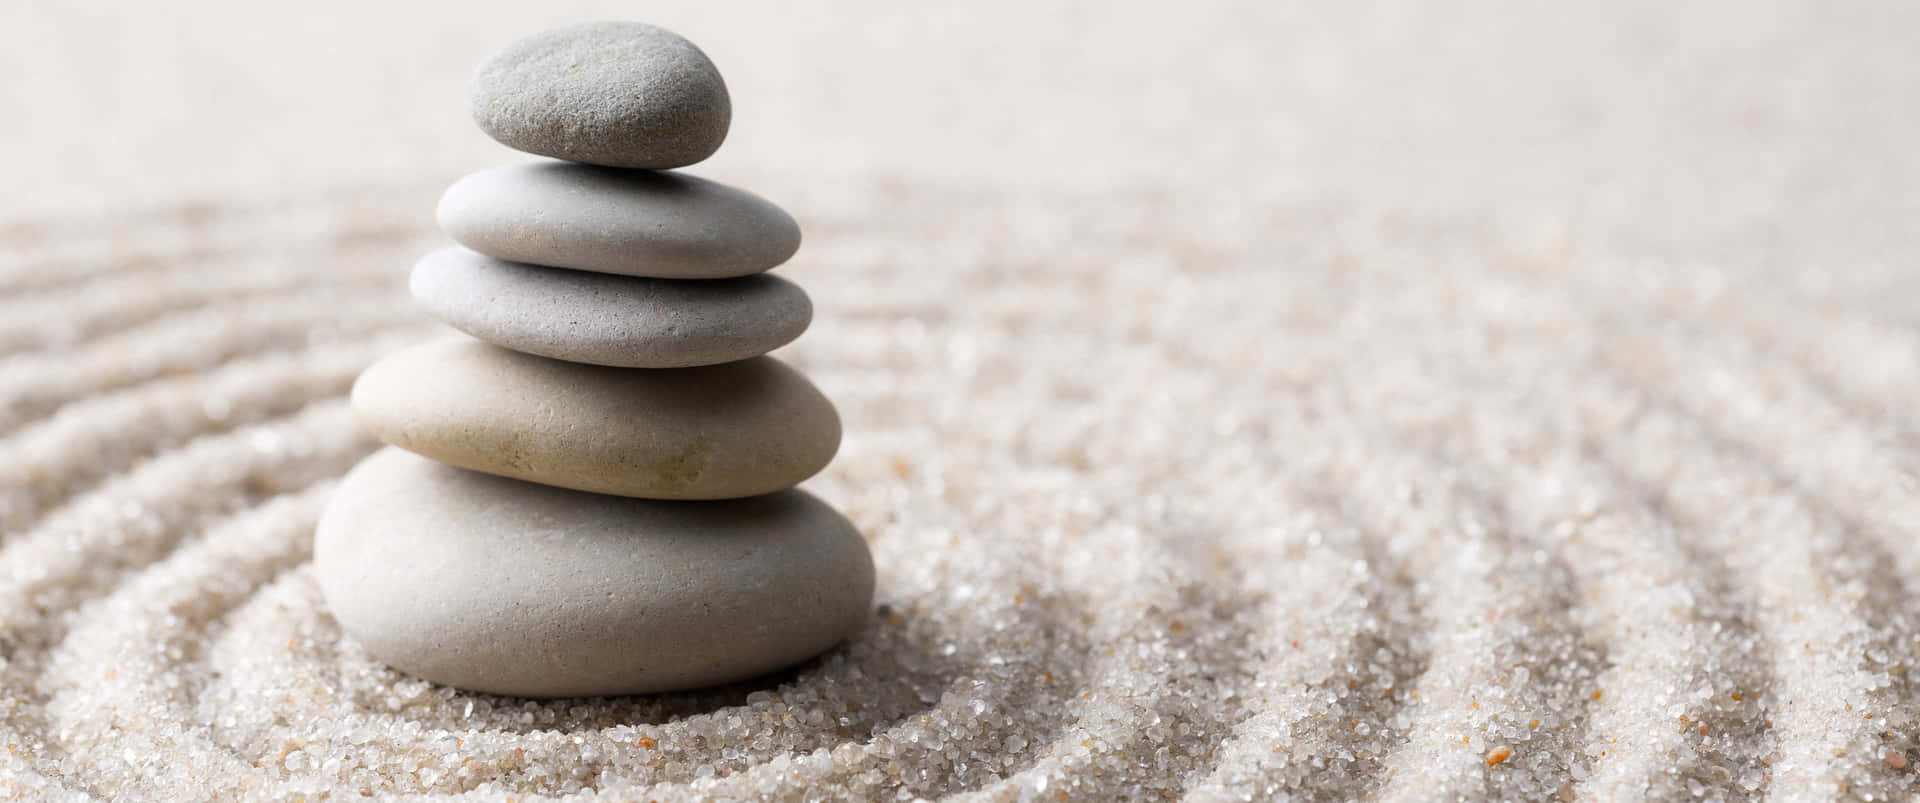 Adopt the Practice of Zen to find Balance and Clarity.